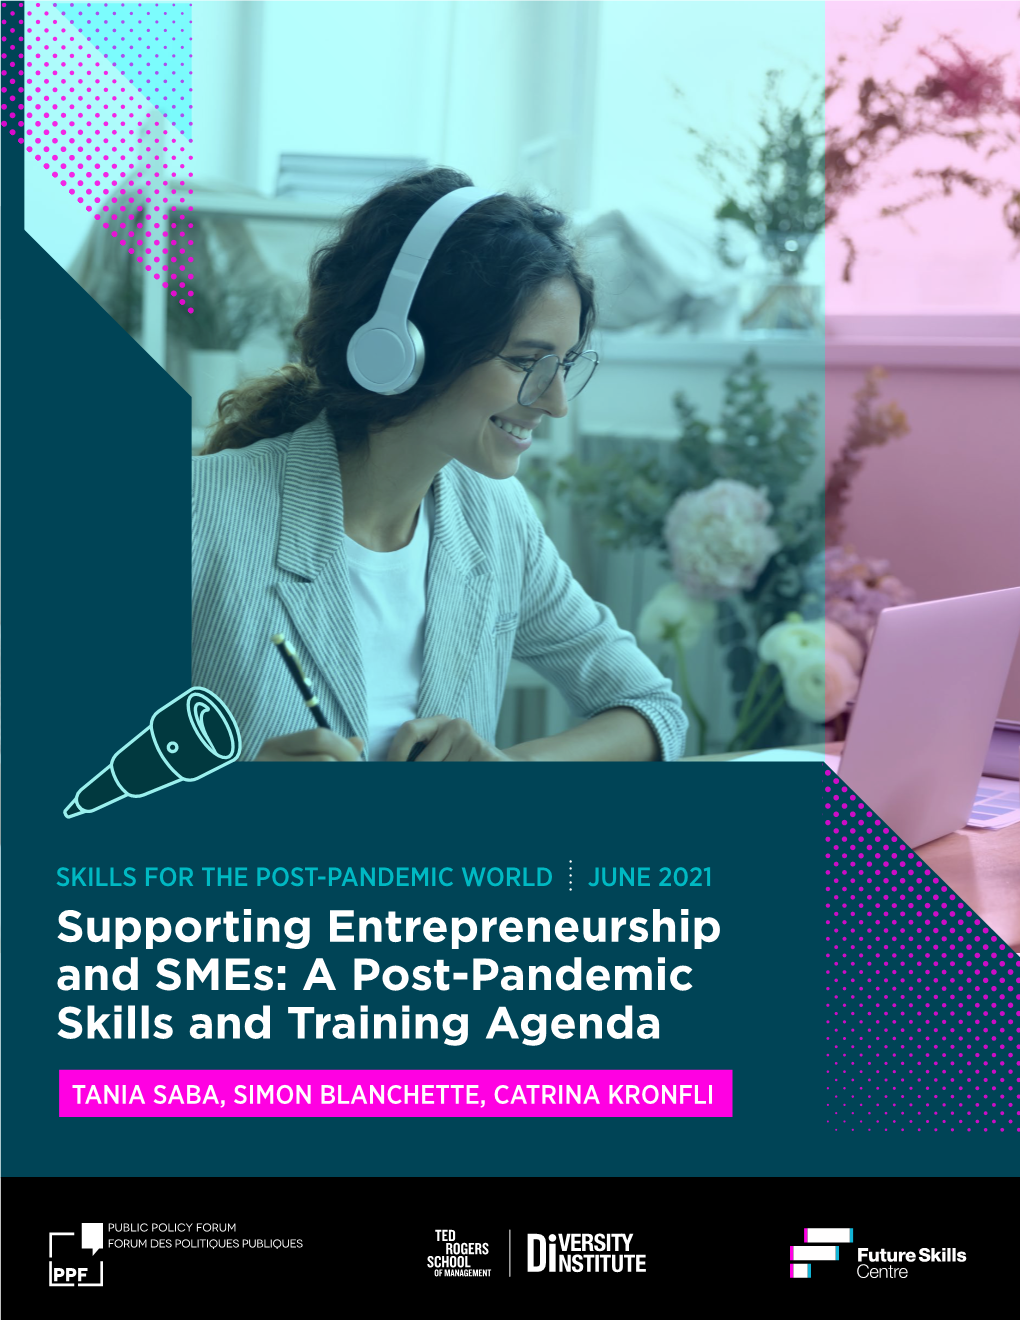 Supporting Entrepreneurship and Smes: a Post-Pandemic Skills and Training Agenda